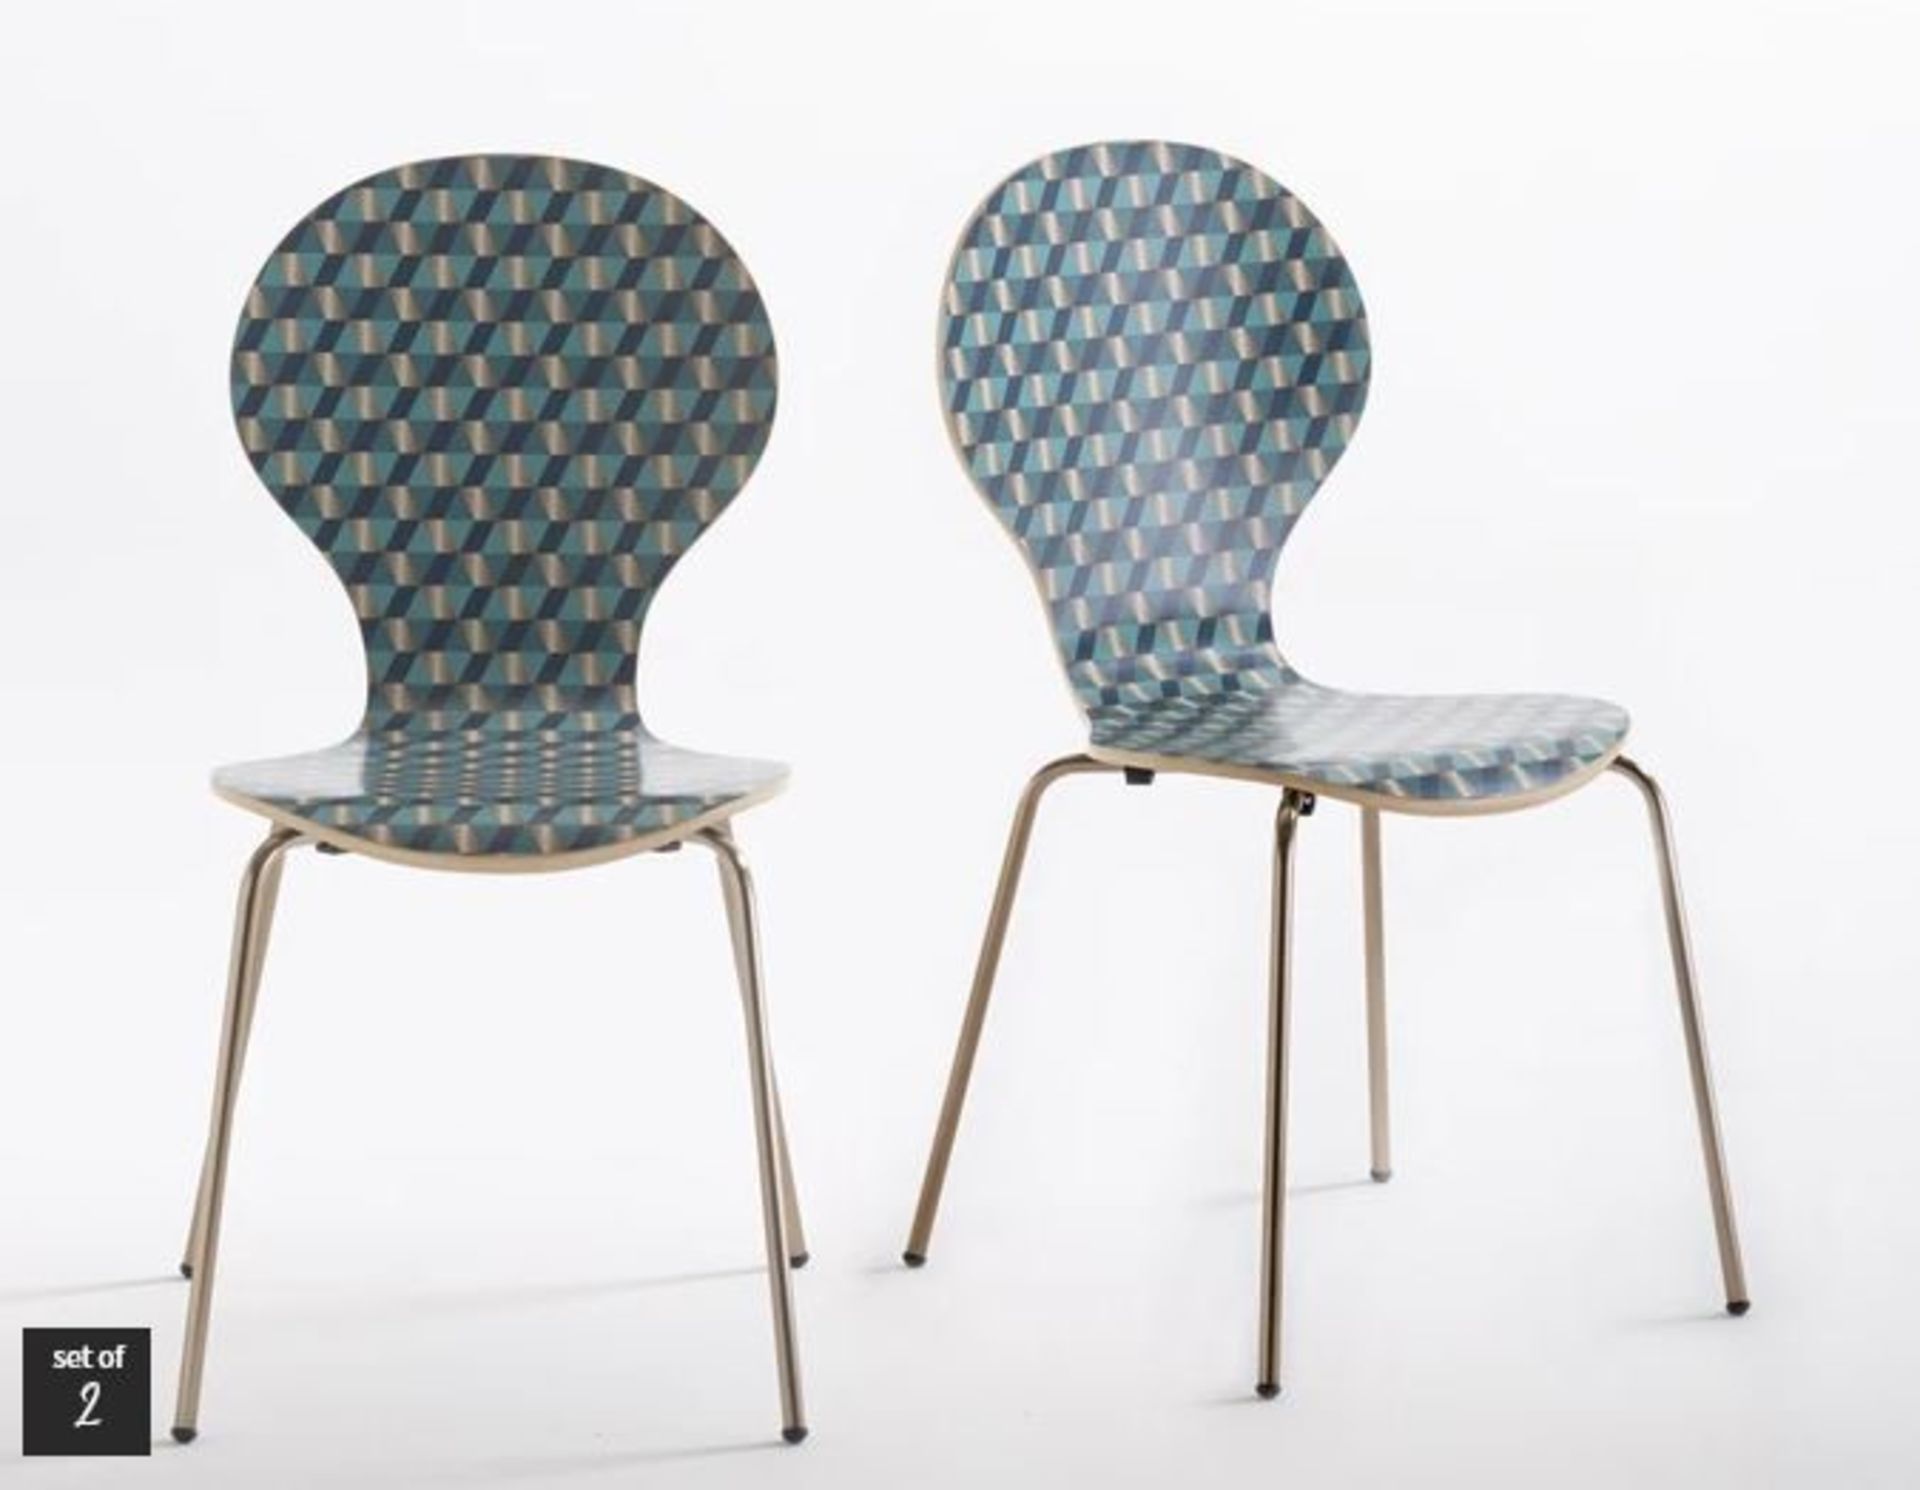 LA REDOUTE WATFORD RETRO STACKABLE PRINT CHAIRS (SET OF 2)